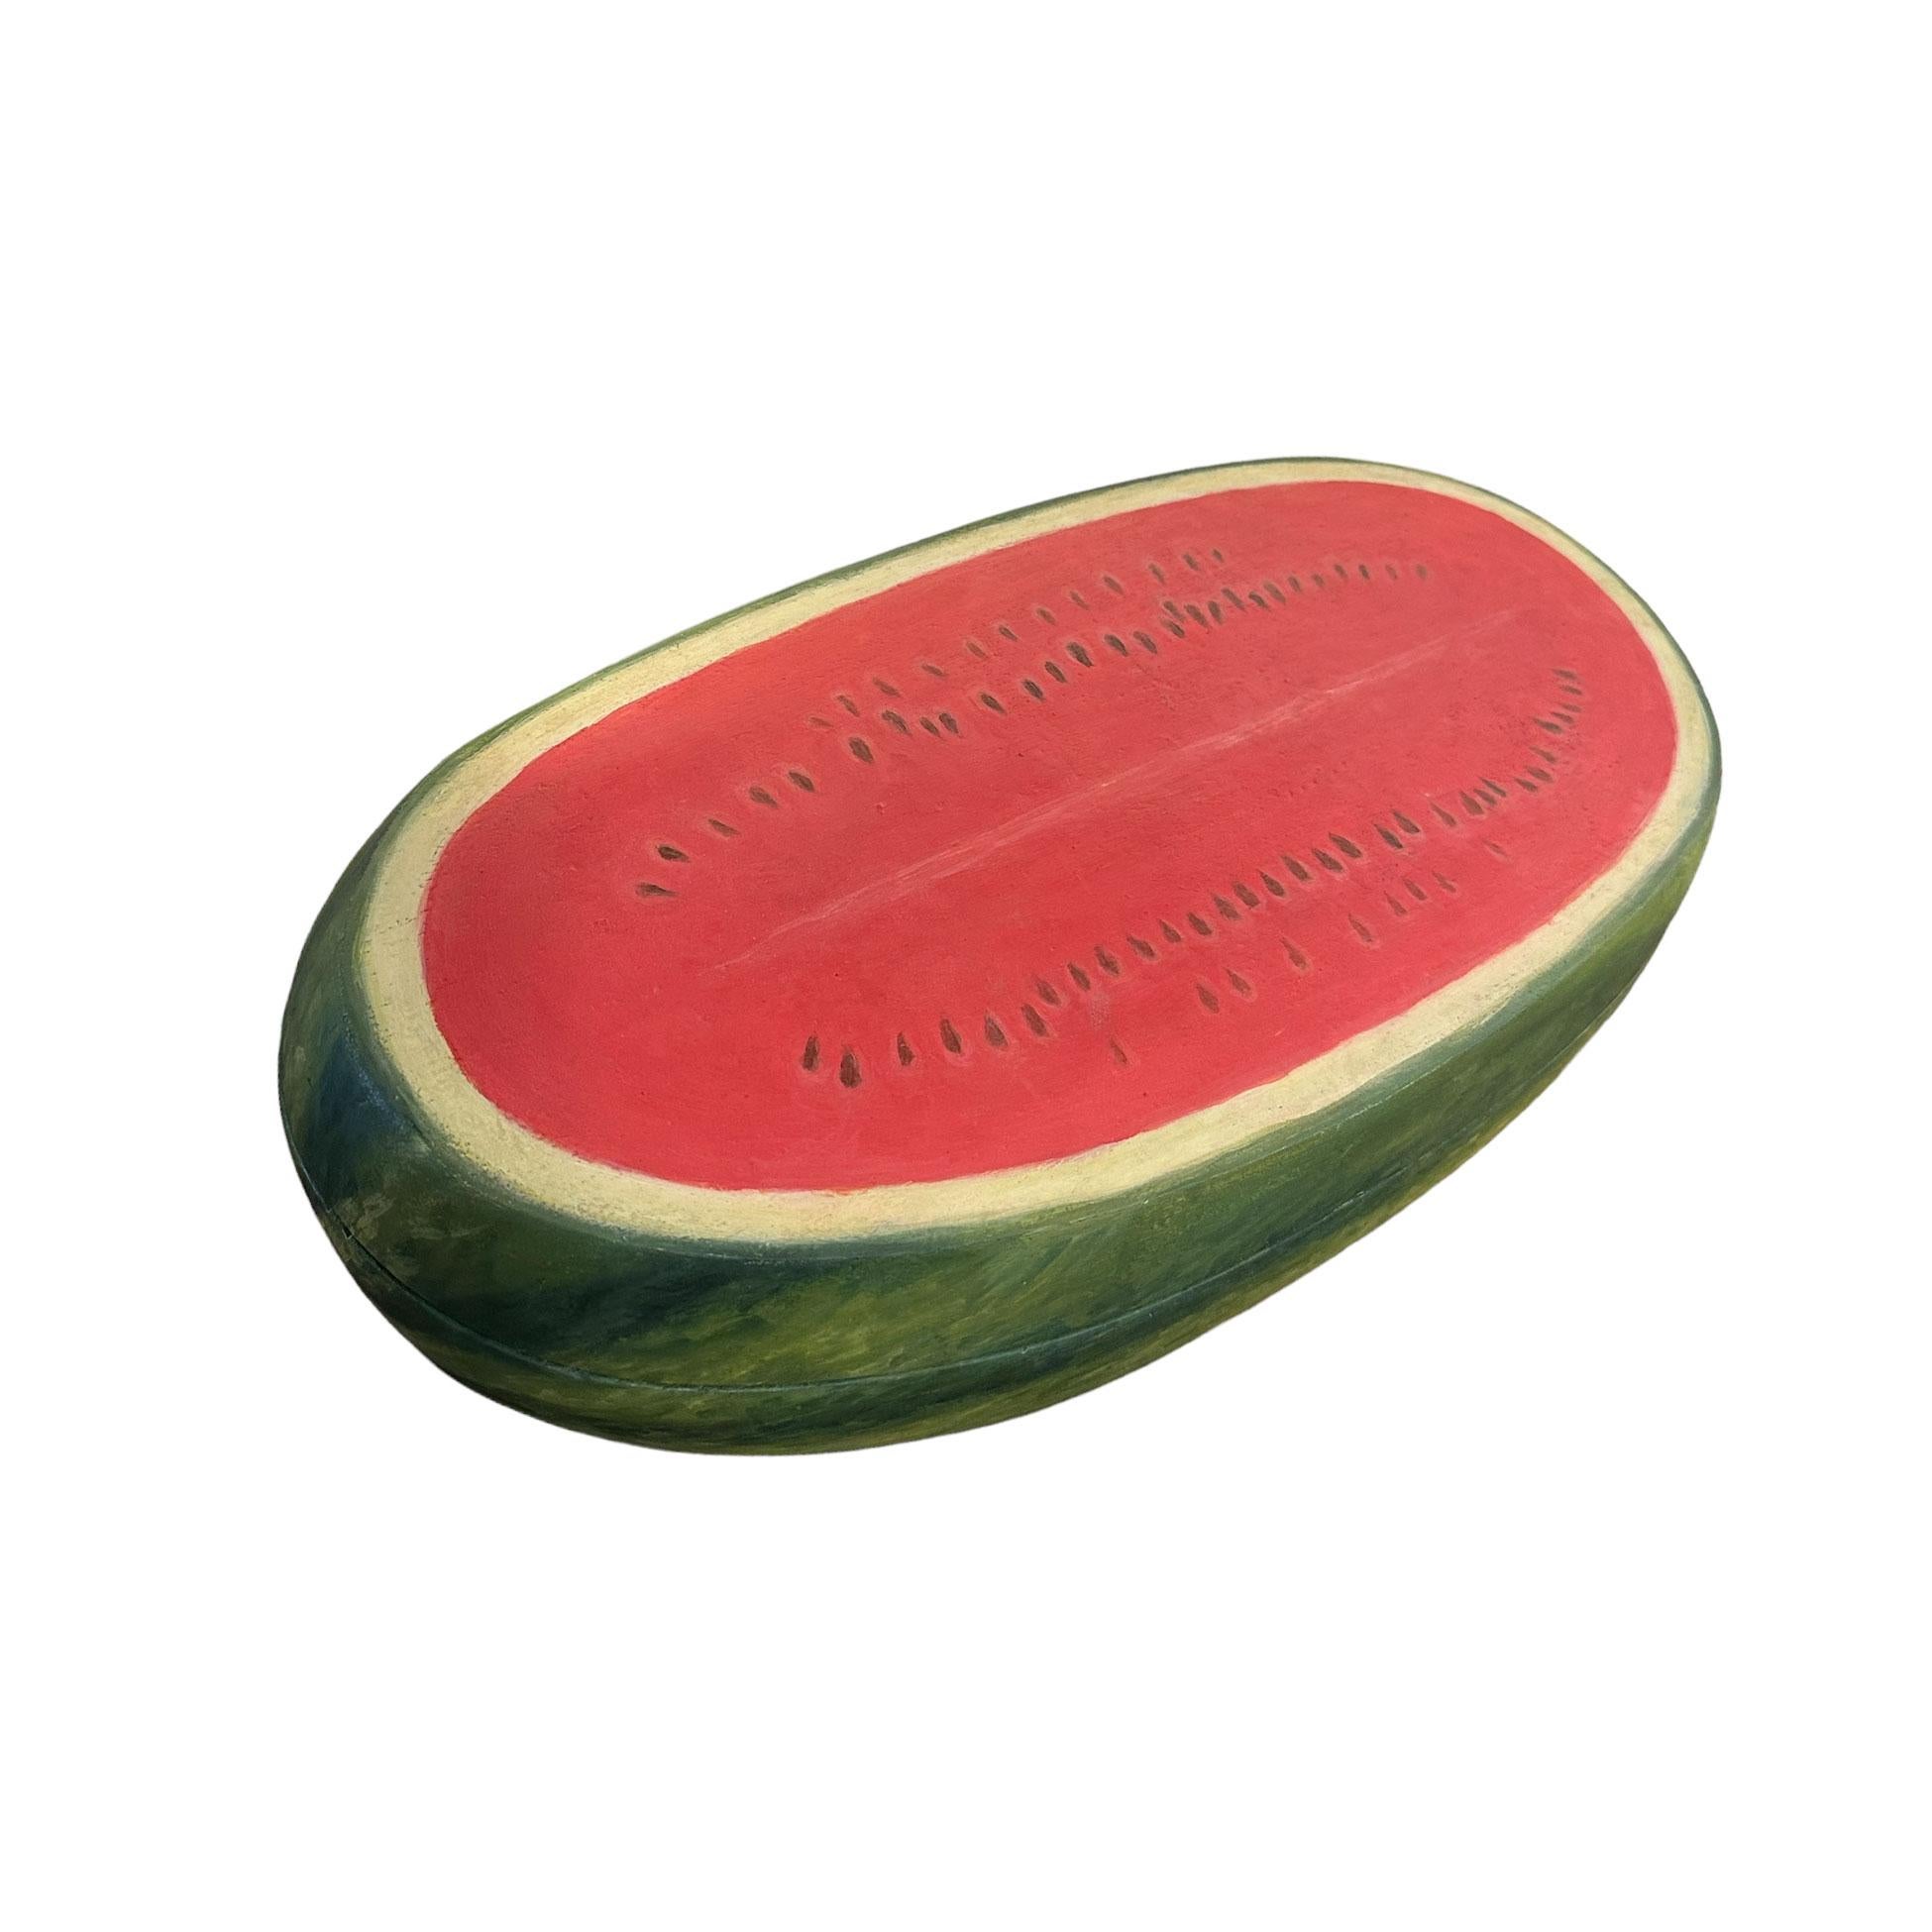 Carved and painted watermelon bowl by master carver Frank Finney. Lift top lid, with scraping style interior. Signed on bottom 